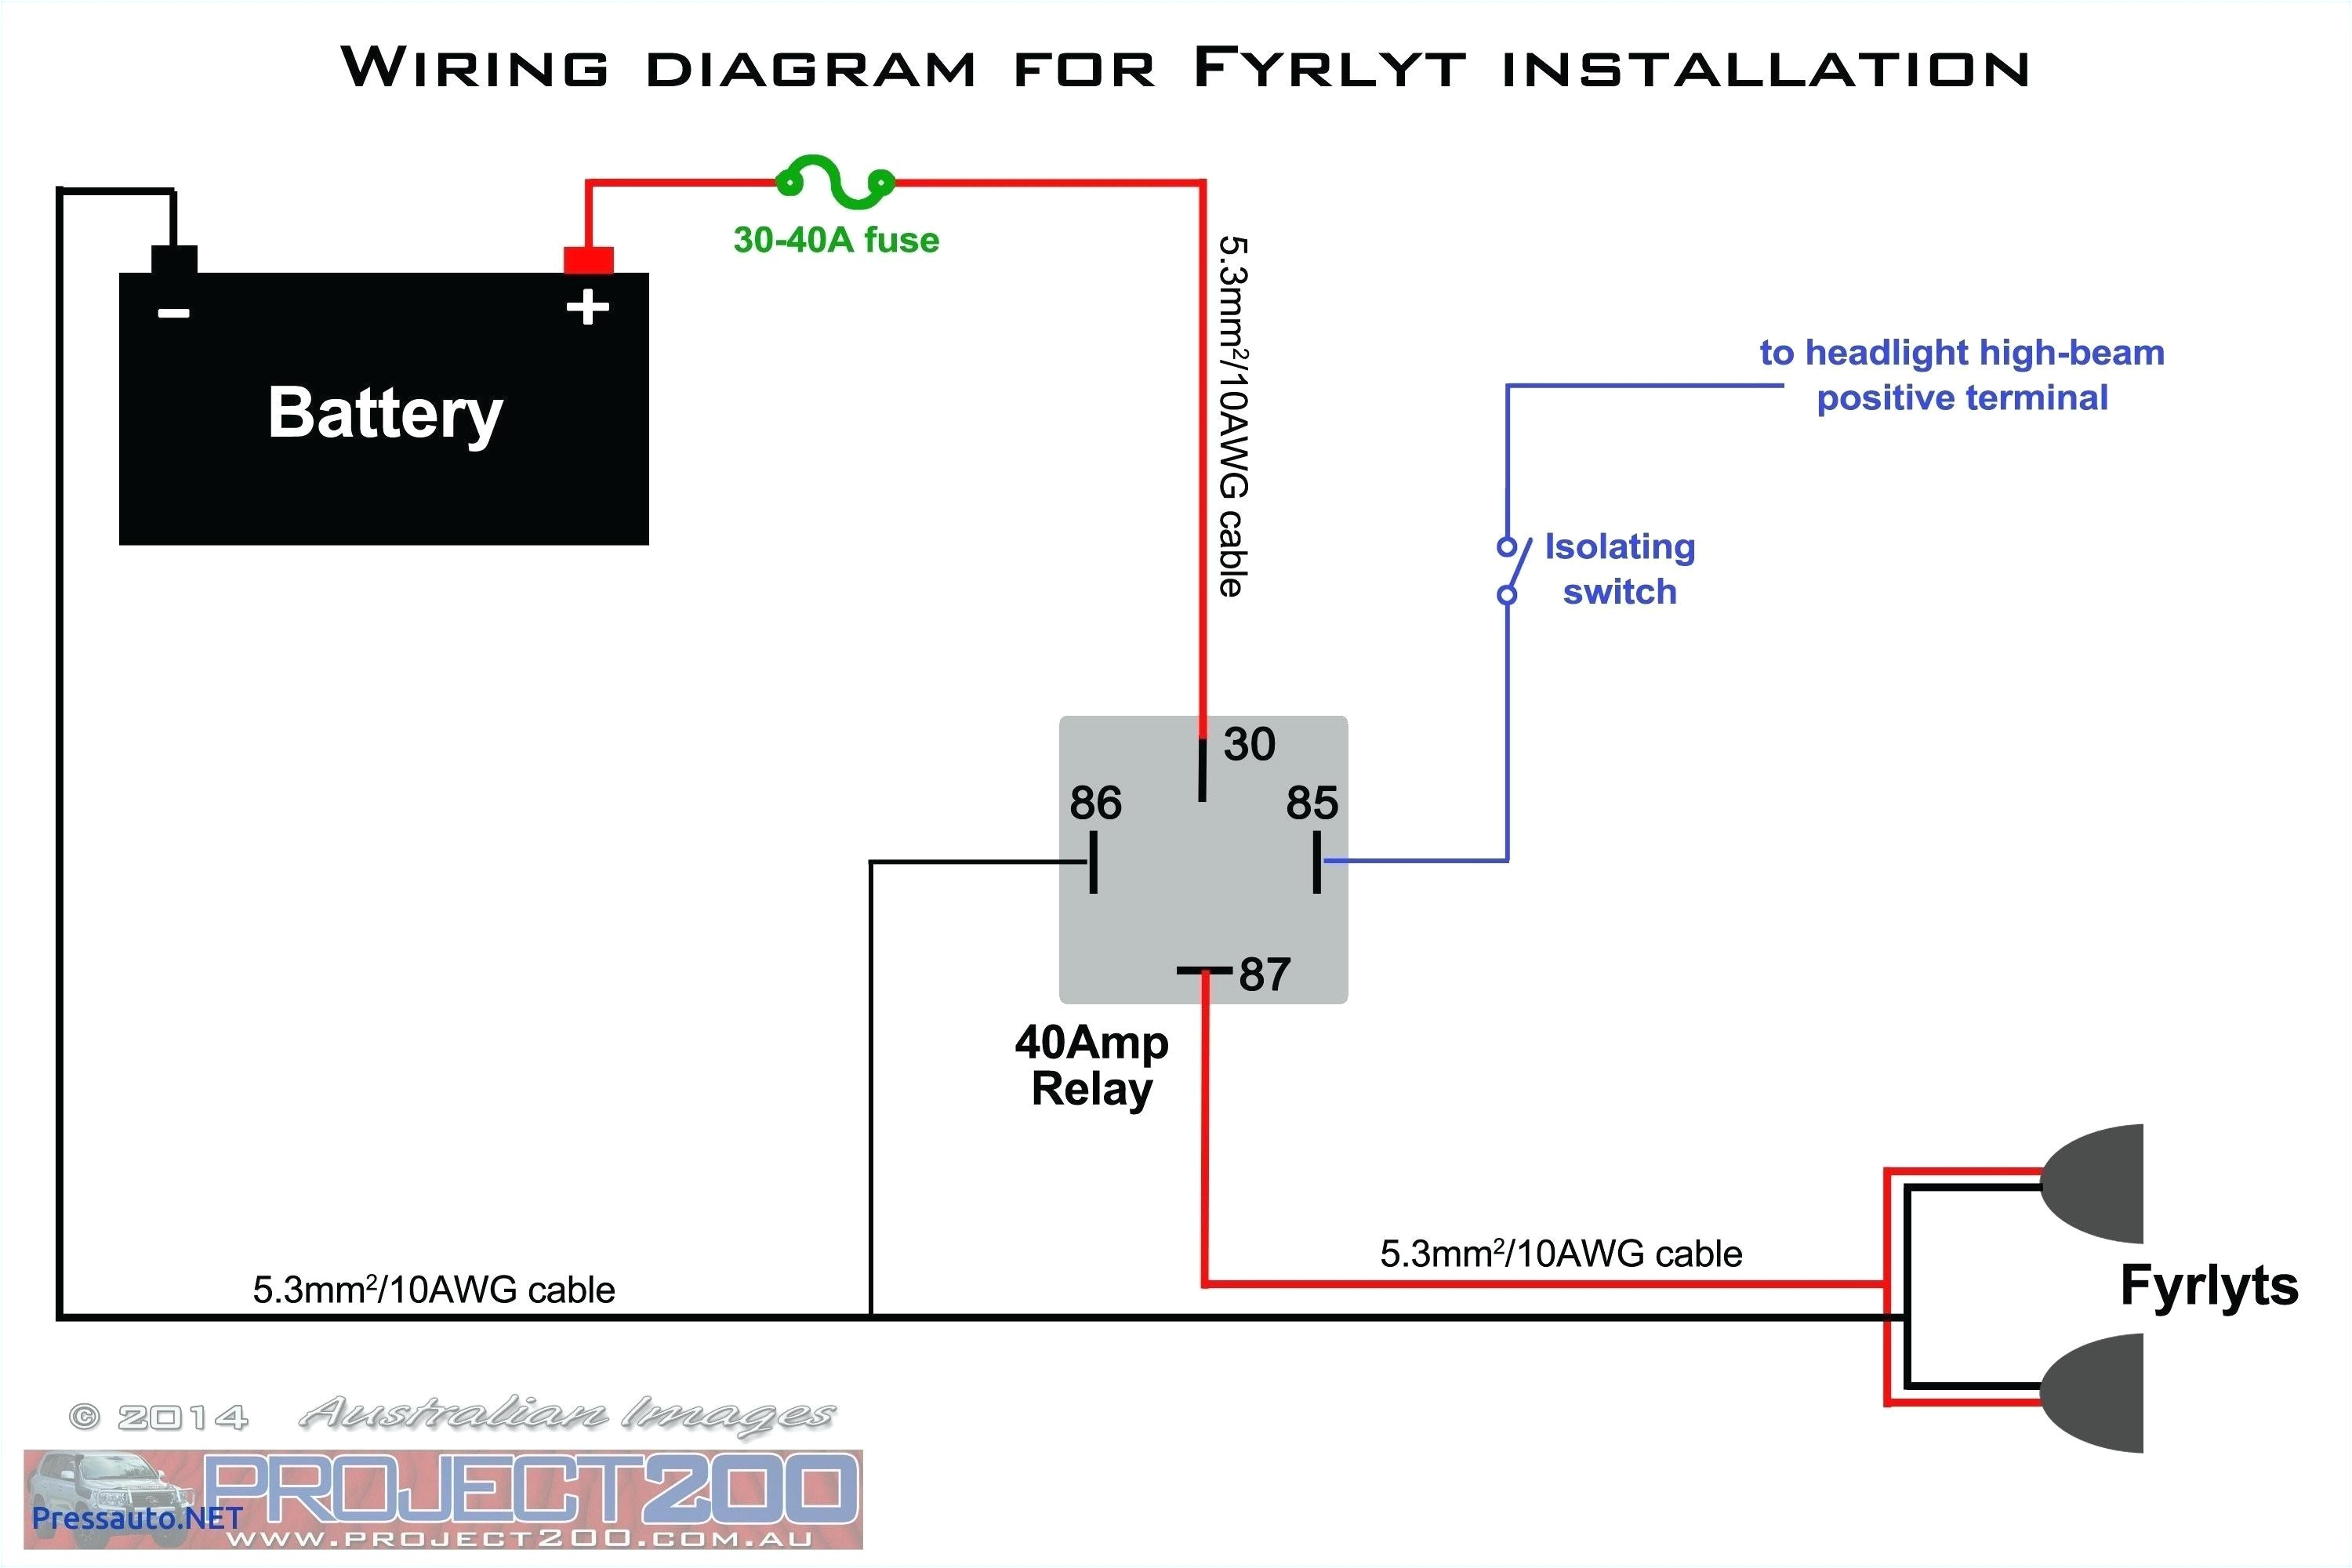 12v 5 pin relay wiring diagram best of wiring diagram for 12v driving lights inspirationa 5